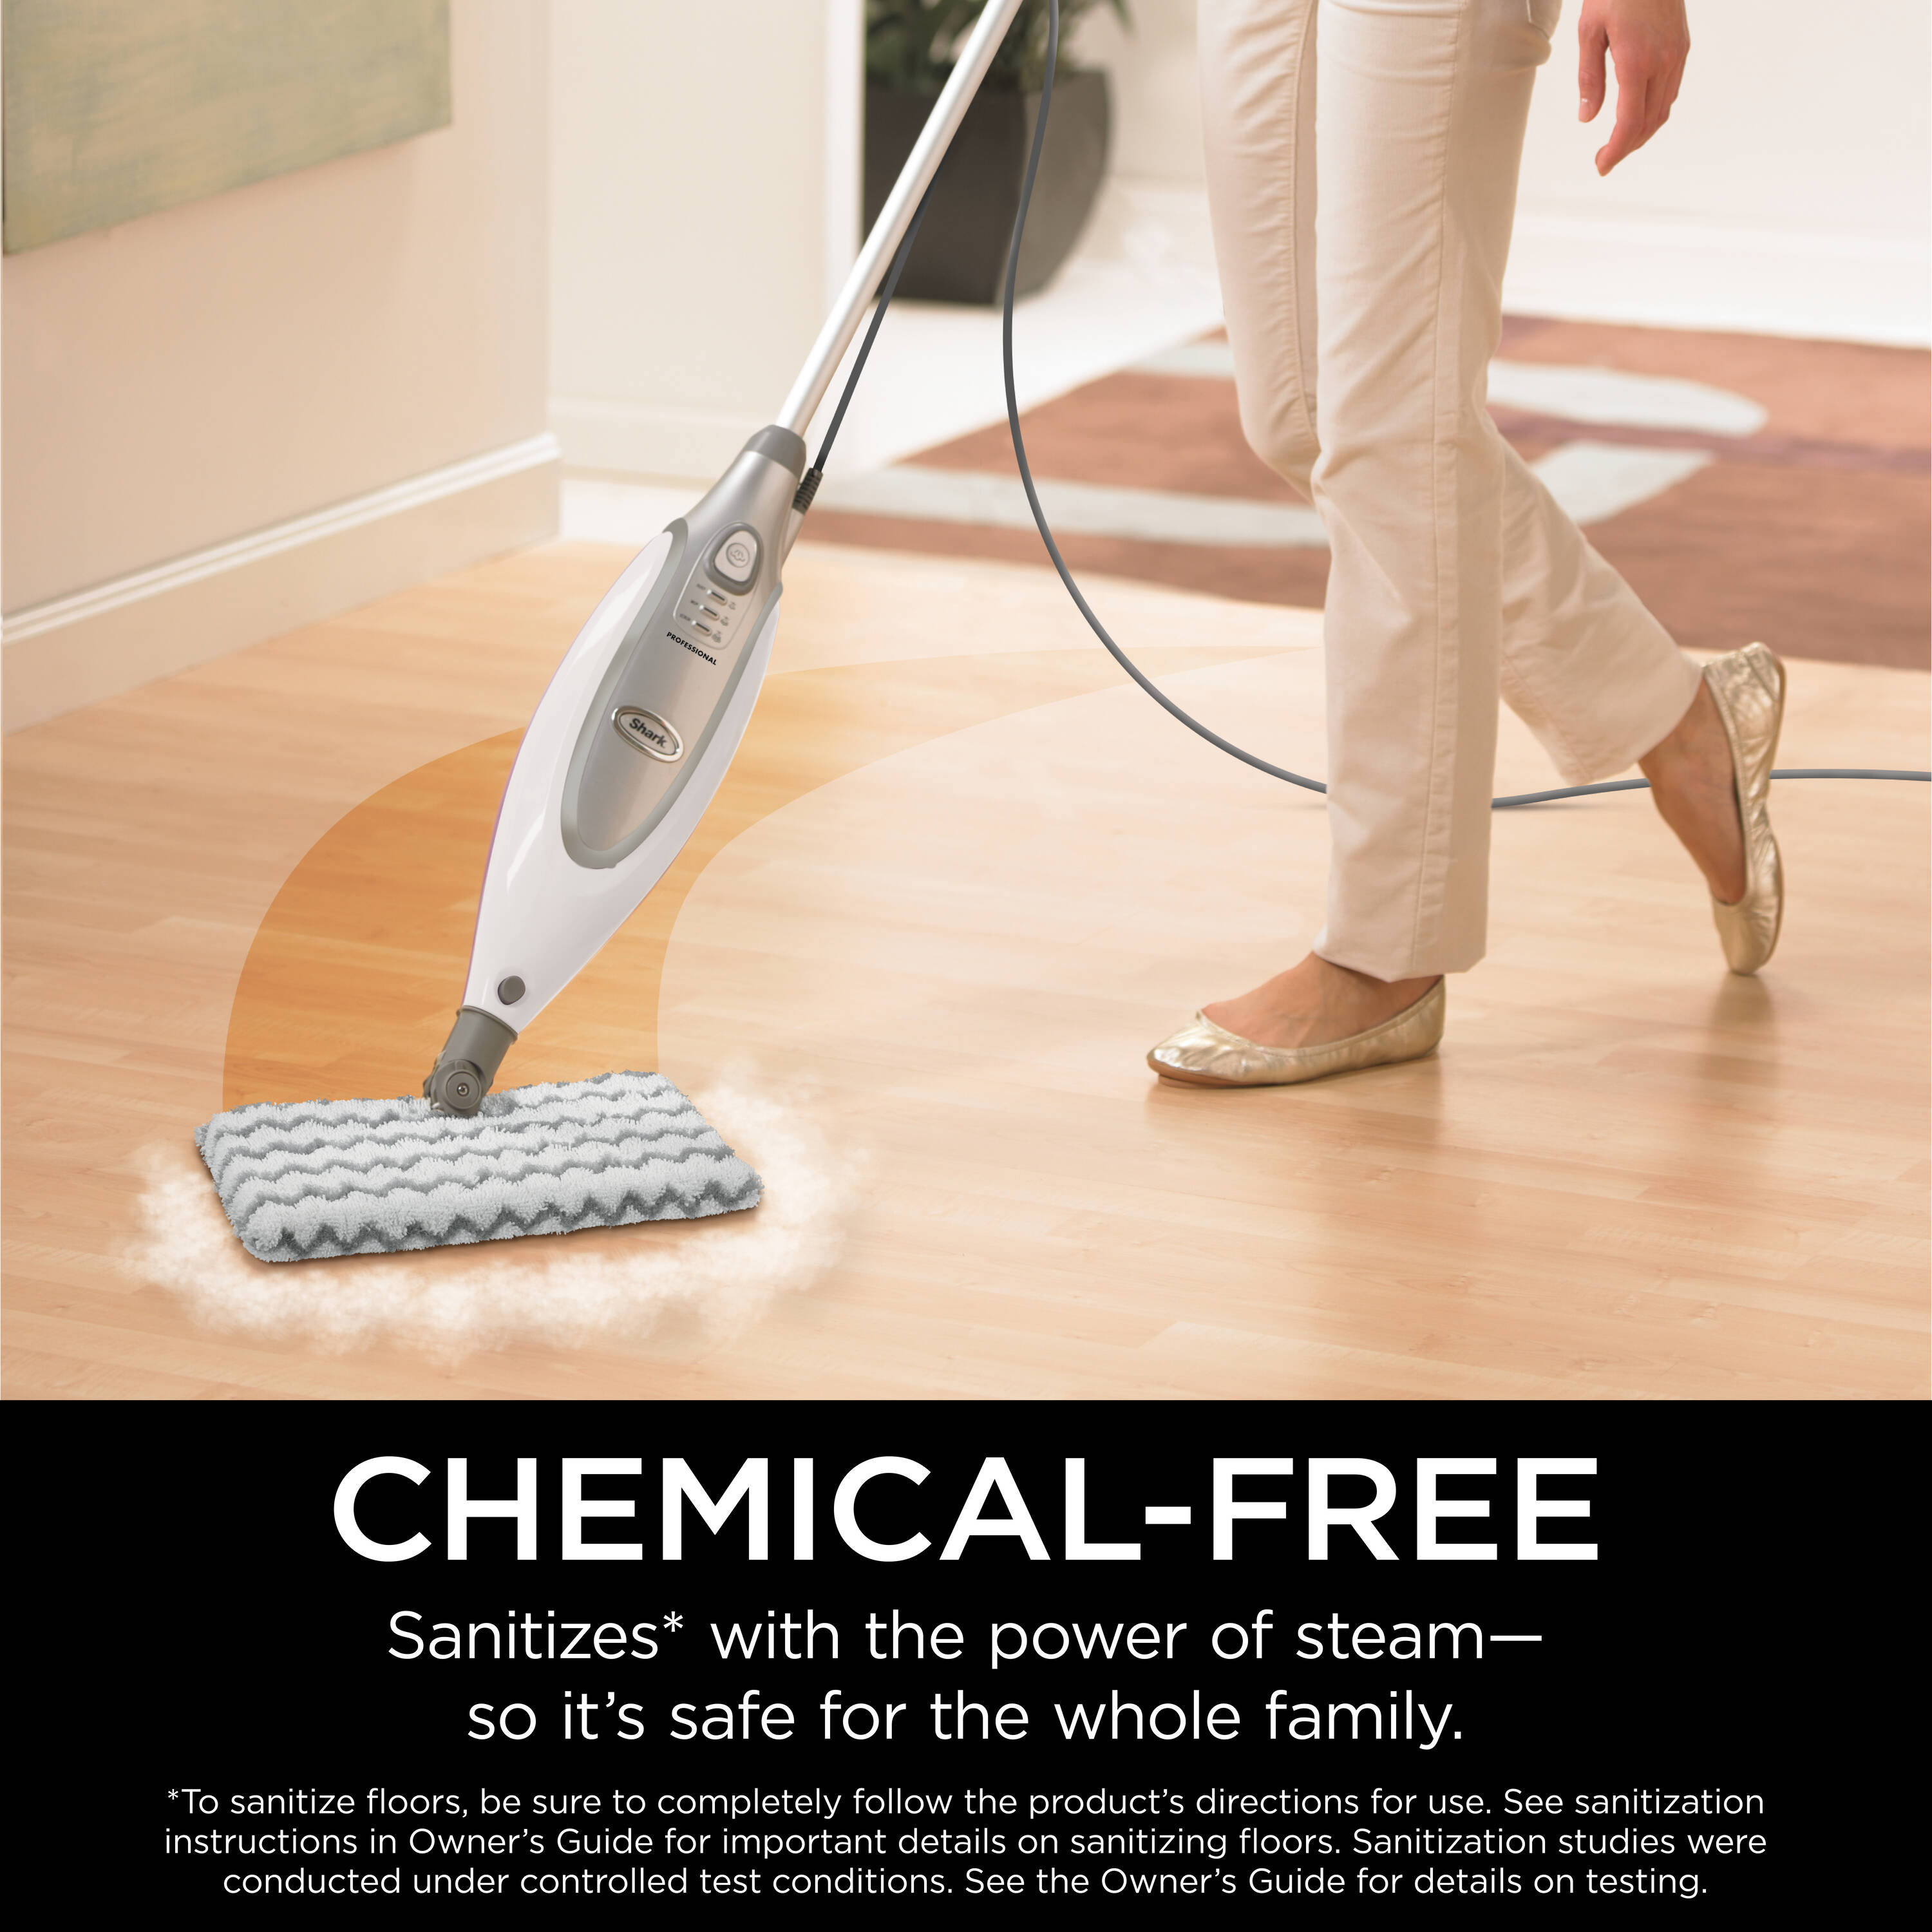 Shark Steam Mop for deep cleaning and sanitizing hard floors